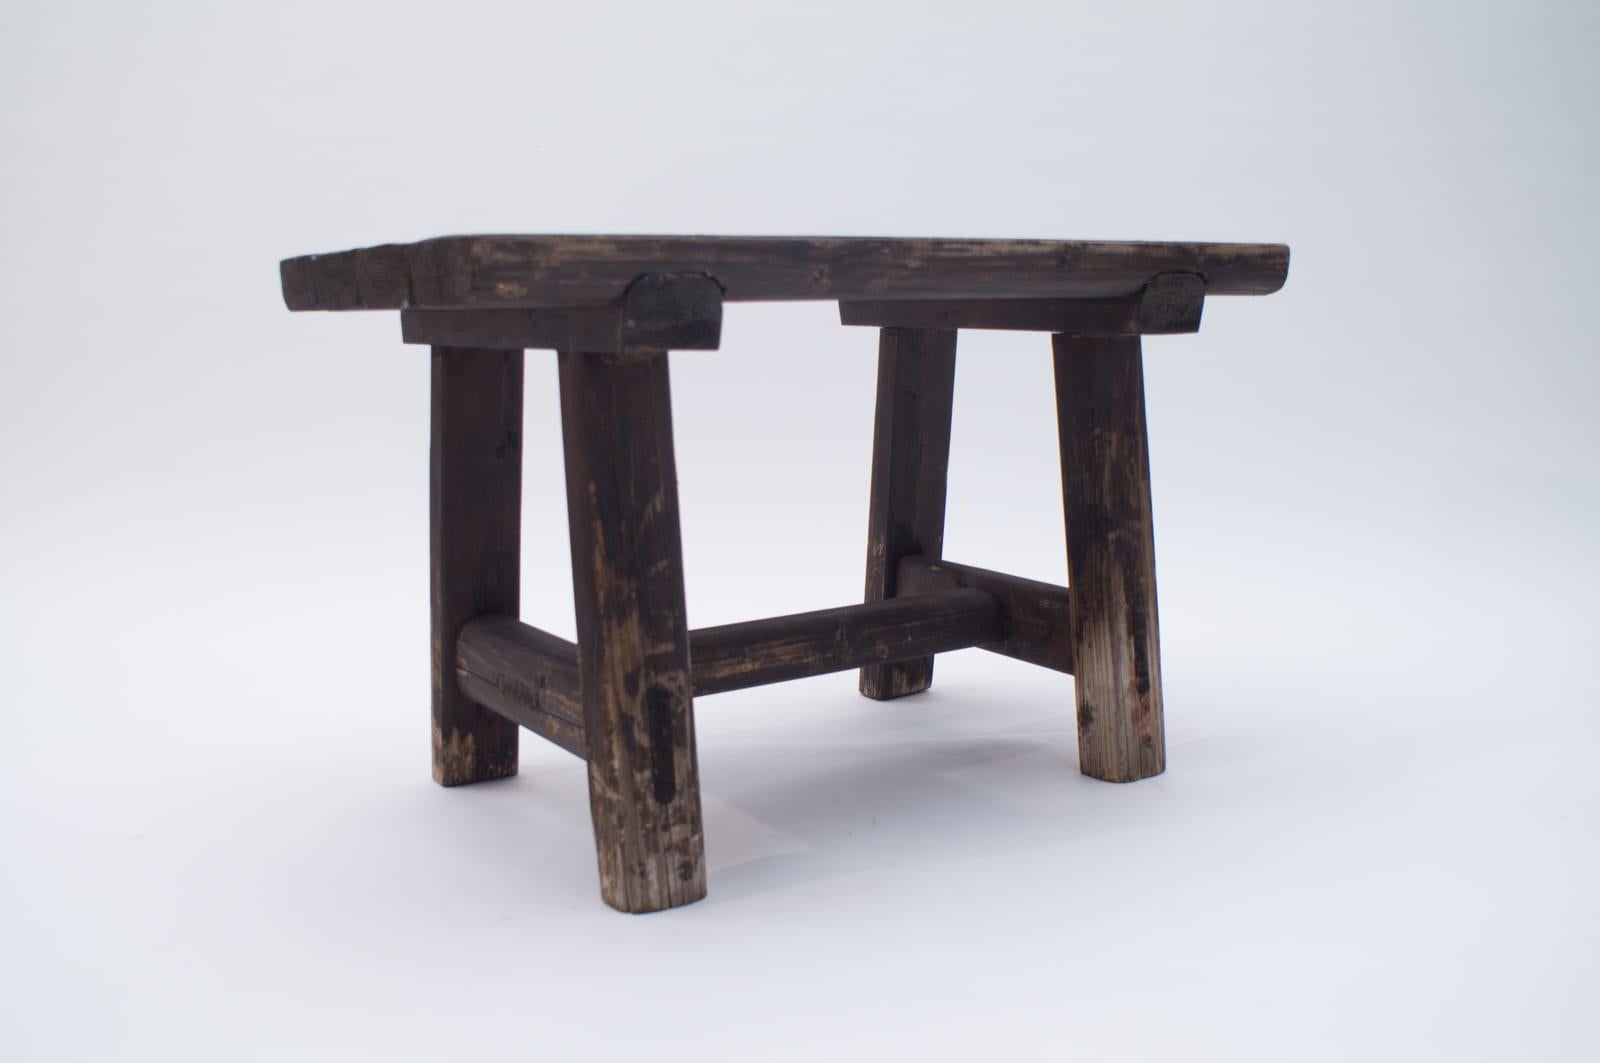 Very nice, handmade bench from the Black Forest. 

No nails or screws were used, only tenons. 

Very nice patina and signs of age.

 